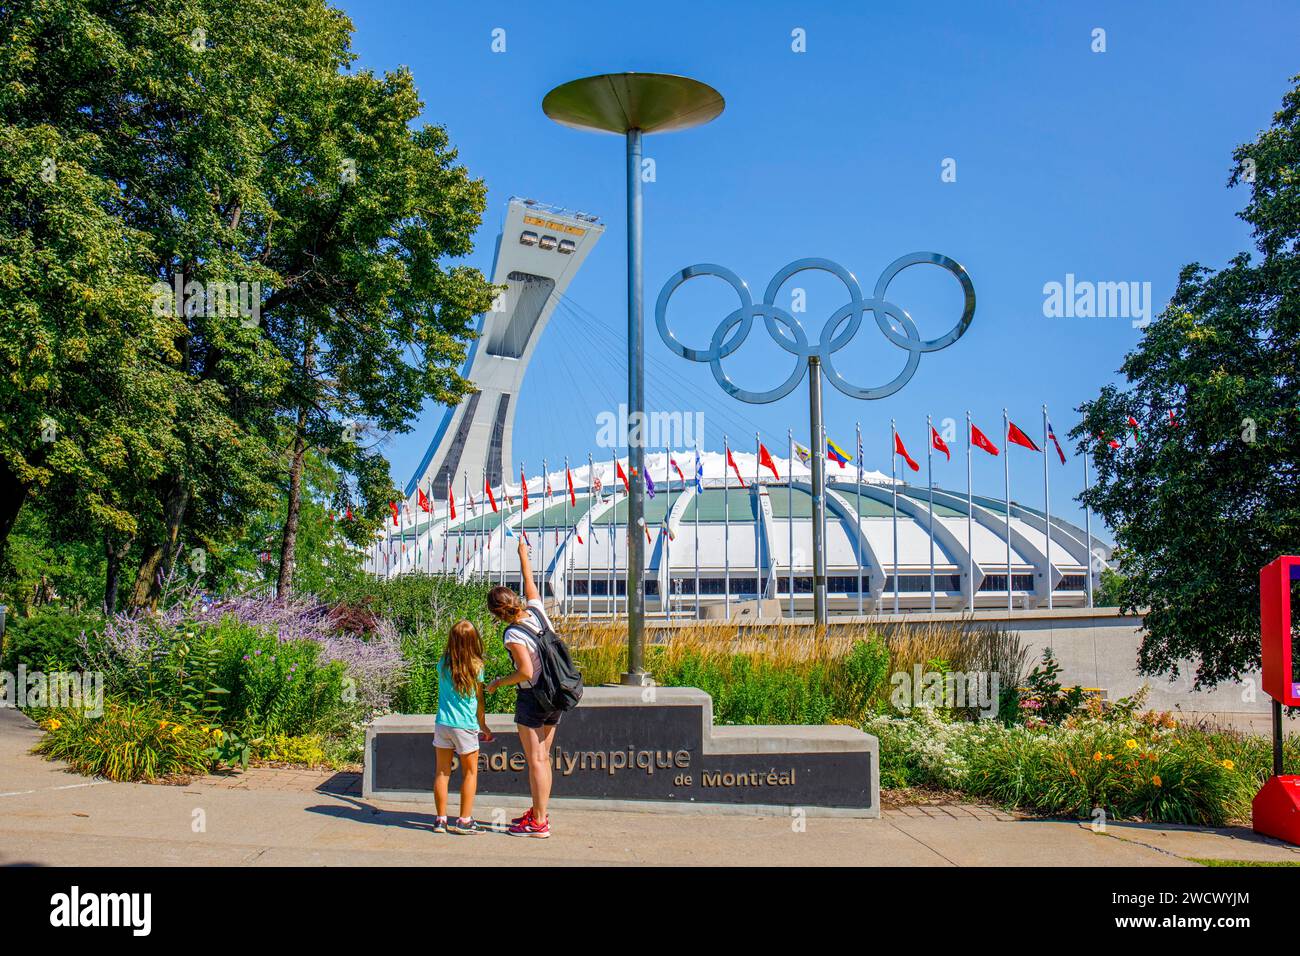 Canada, province of Quebec, Montreal, Hochelaga-Maisonneuve, the Olympic stadium and its tower, works of the architect Roger Taillibert, the Olympic rings Stock Photo